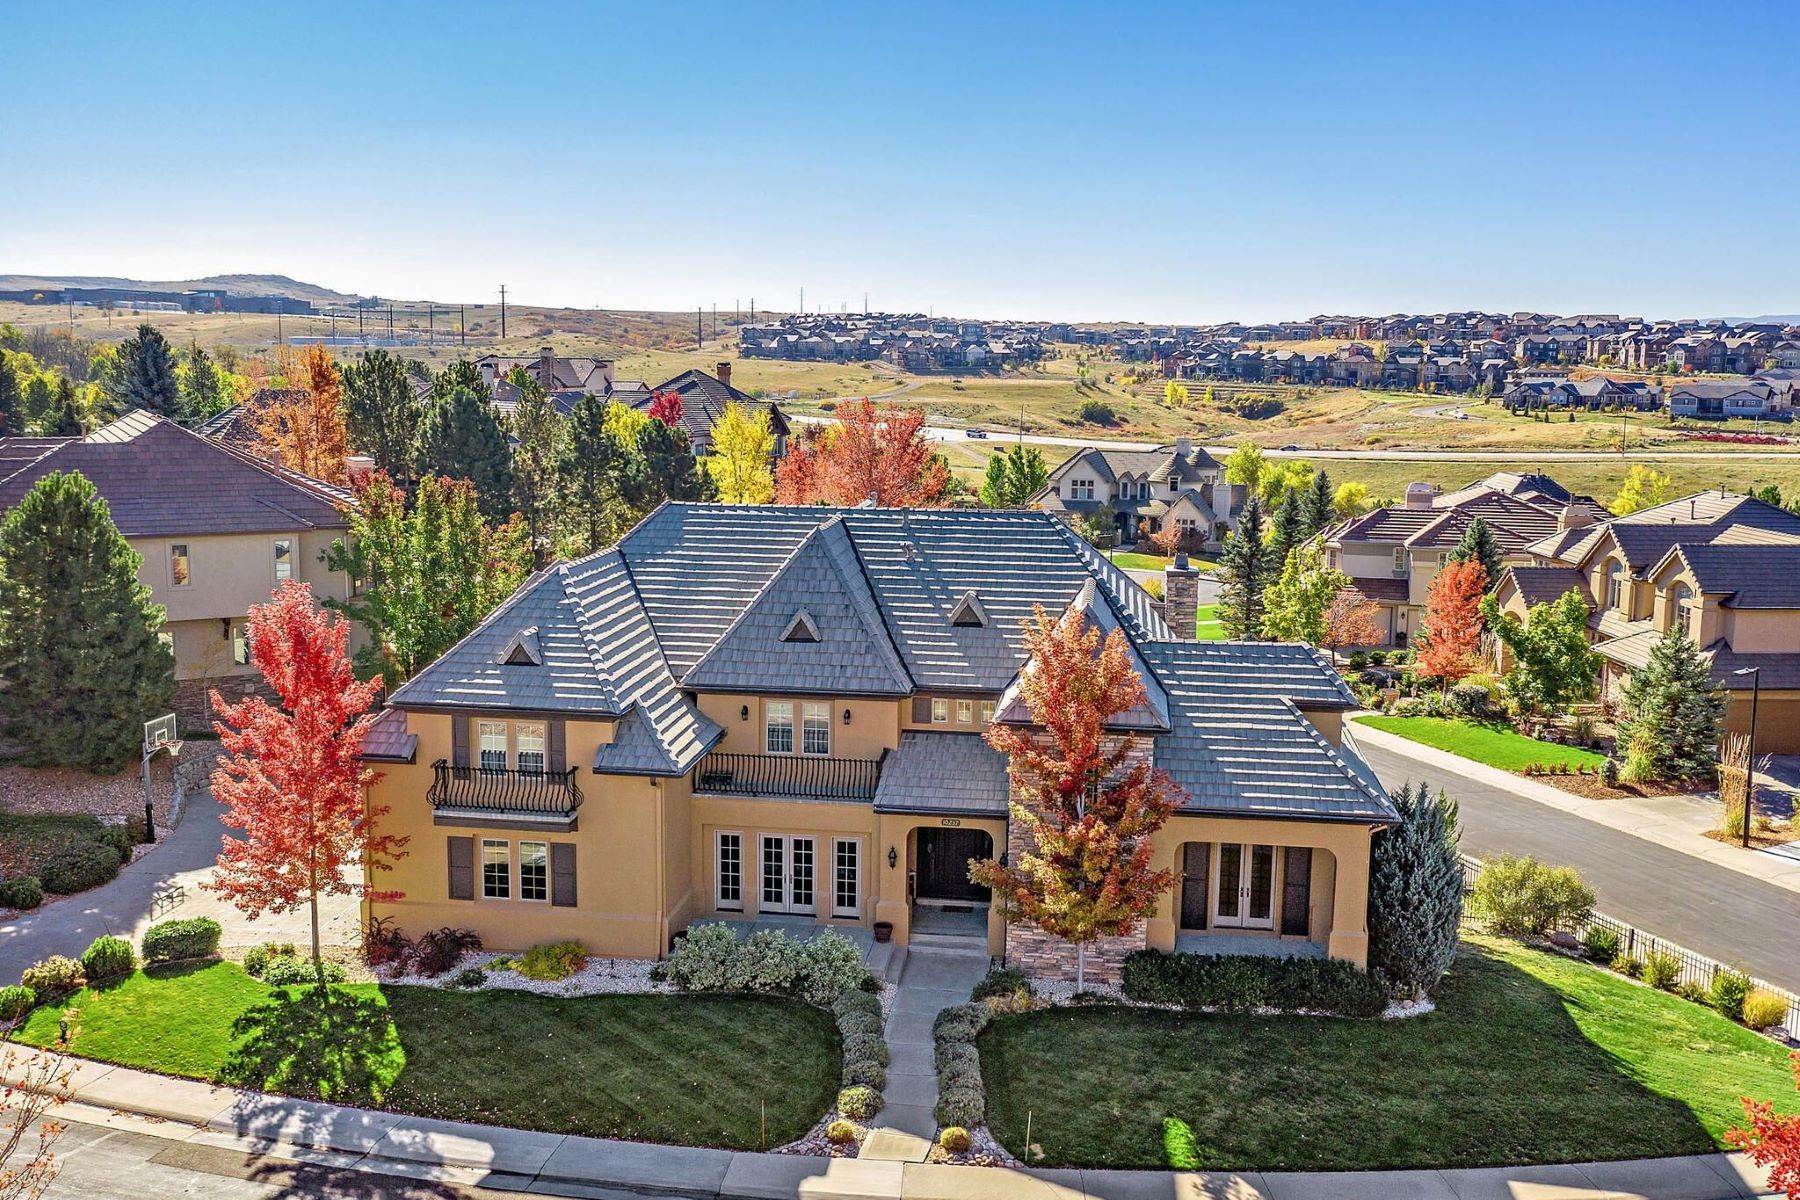 Single Family Homes for Active at Privacy & luxury in Highlands Ranch gated community 10237 Dowling Way Highlands Ranch, Colorado 80126 United States